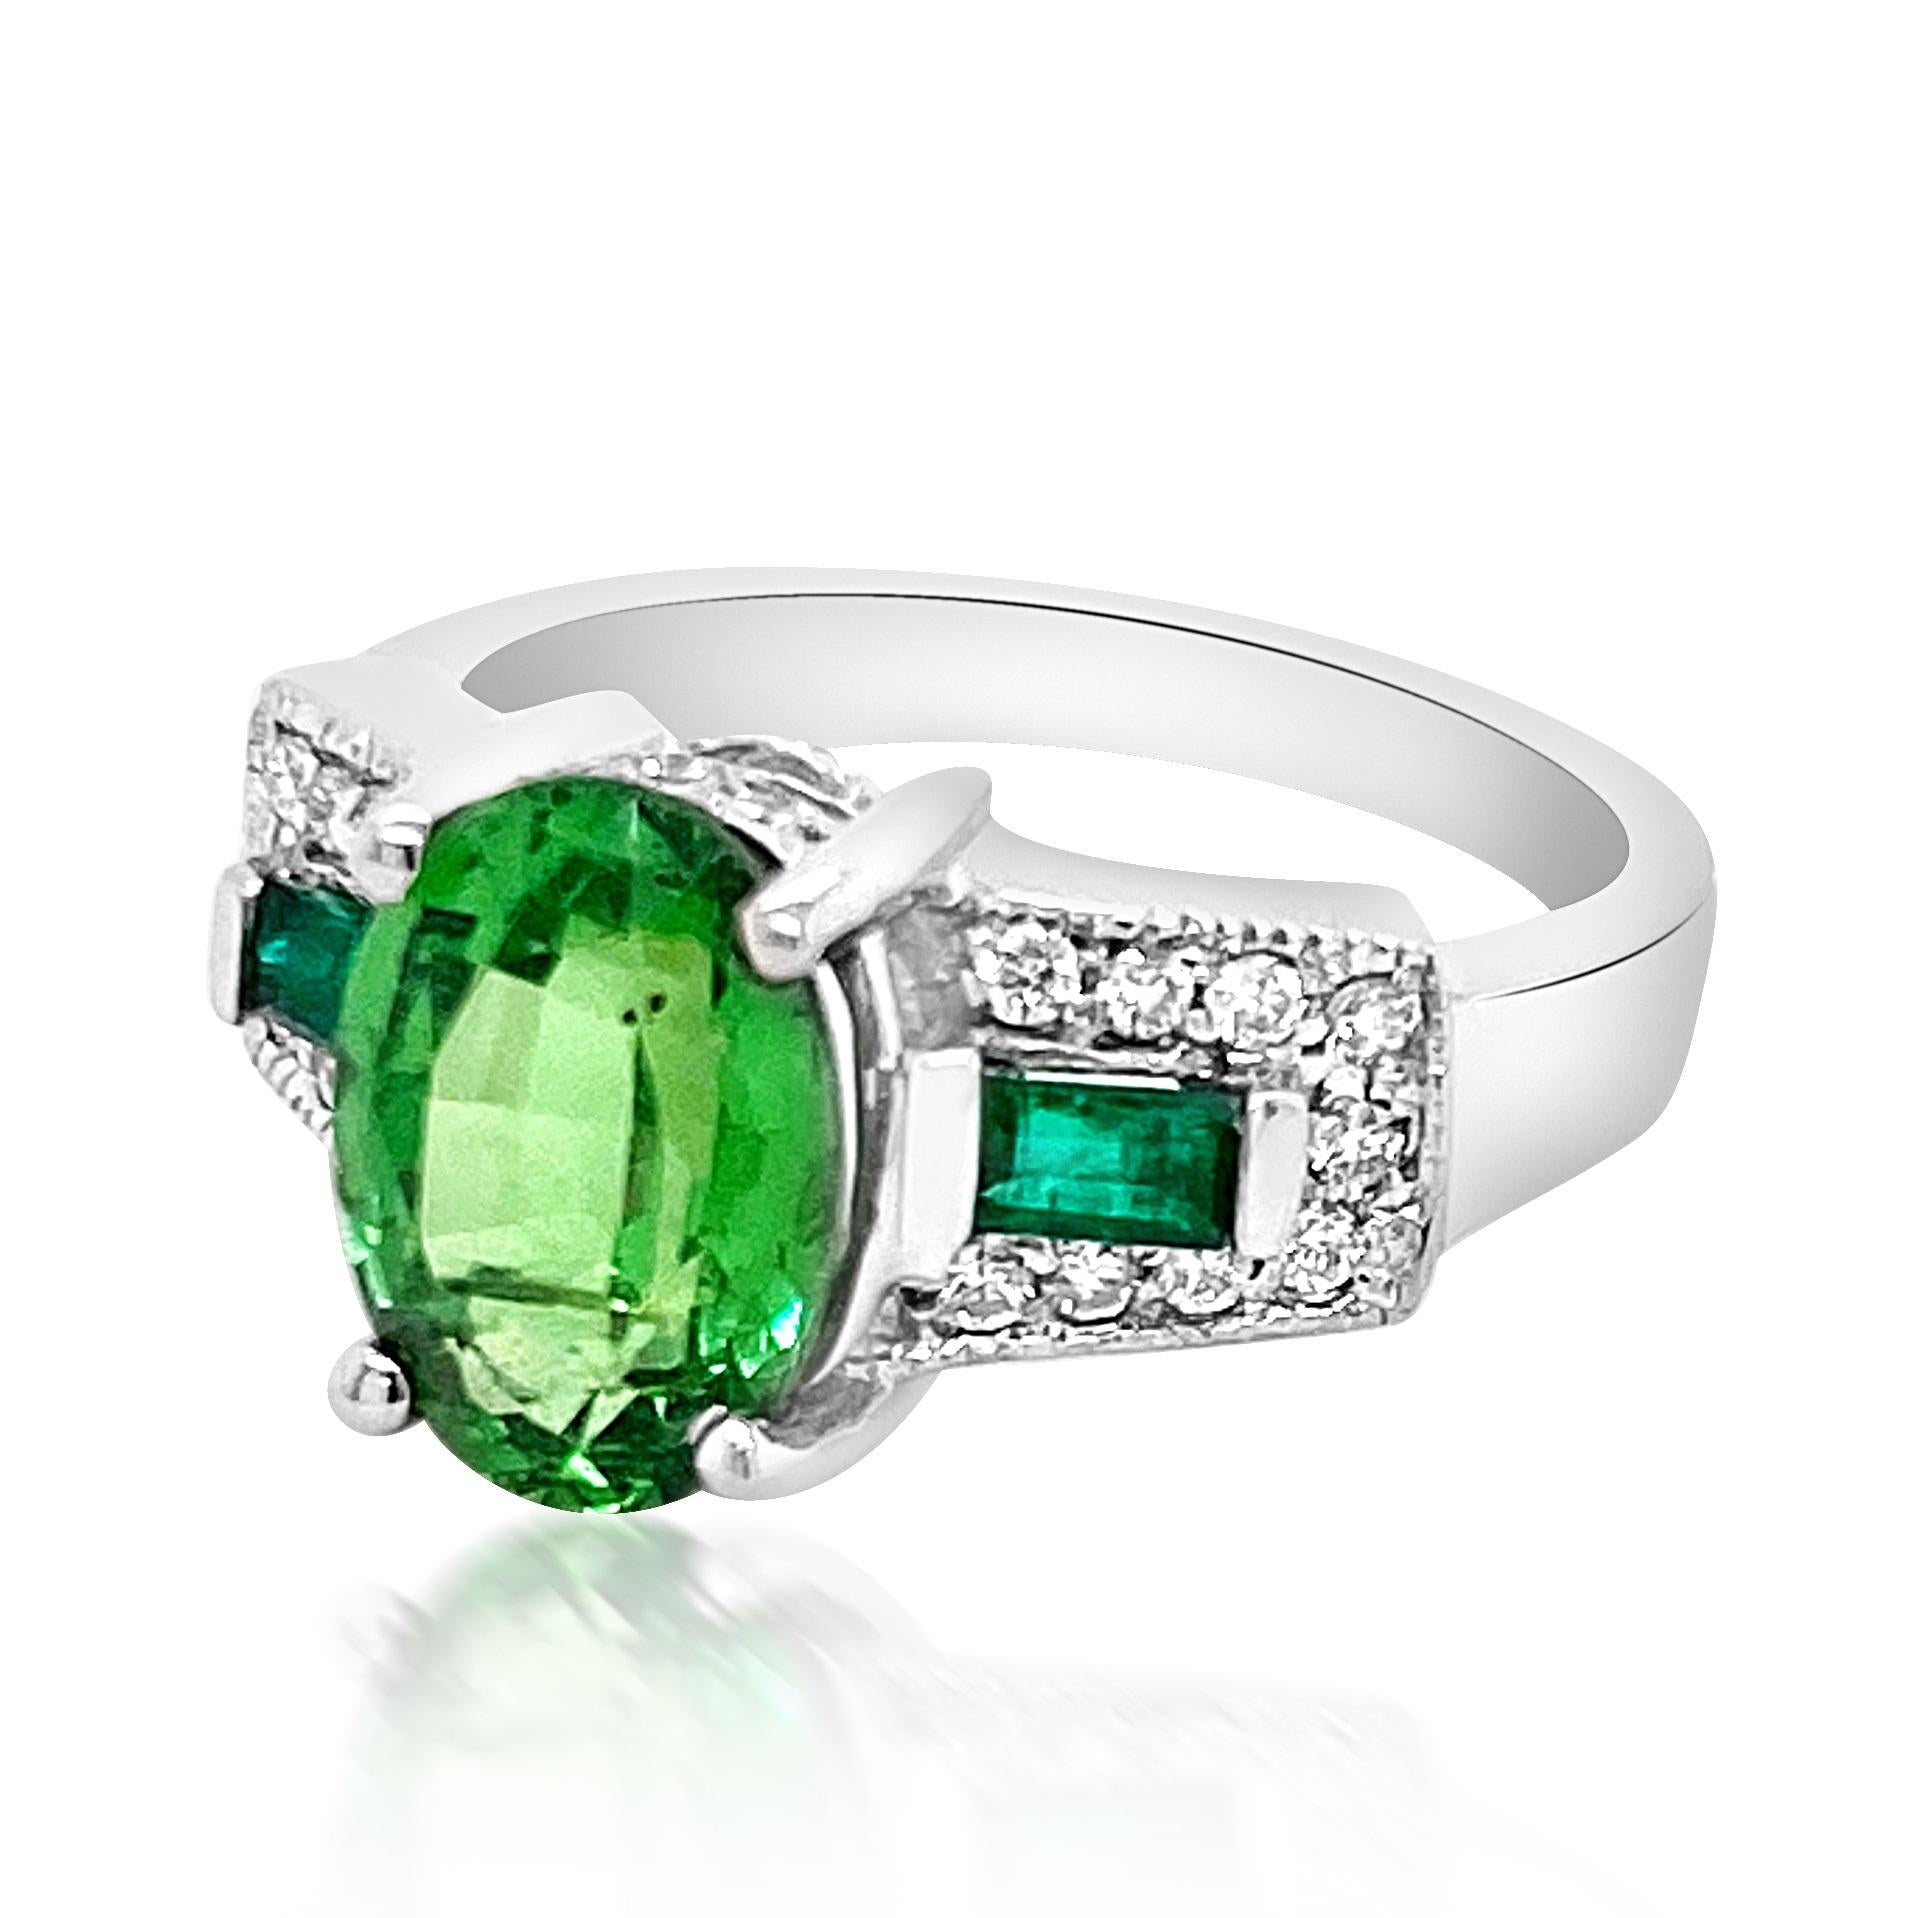  14k W/G RING: 4.33GRAM / TSAVORITE :2.97CT / DIAMOND RD :0.25CT /#GVR1497
This exquisite display of rare glittering 2.97ct oval-shaped green Tsavorite, crafted in warm 14k white gold, is a natural grounder of profuse manifestation. This ring is